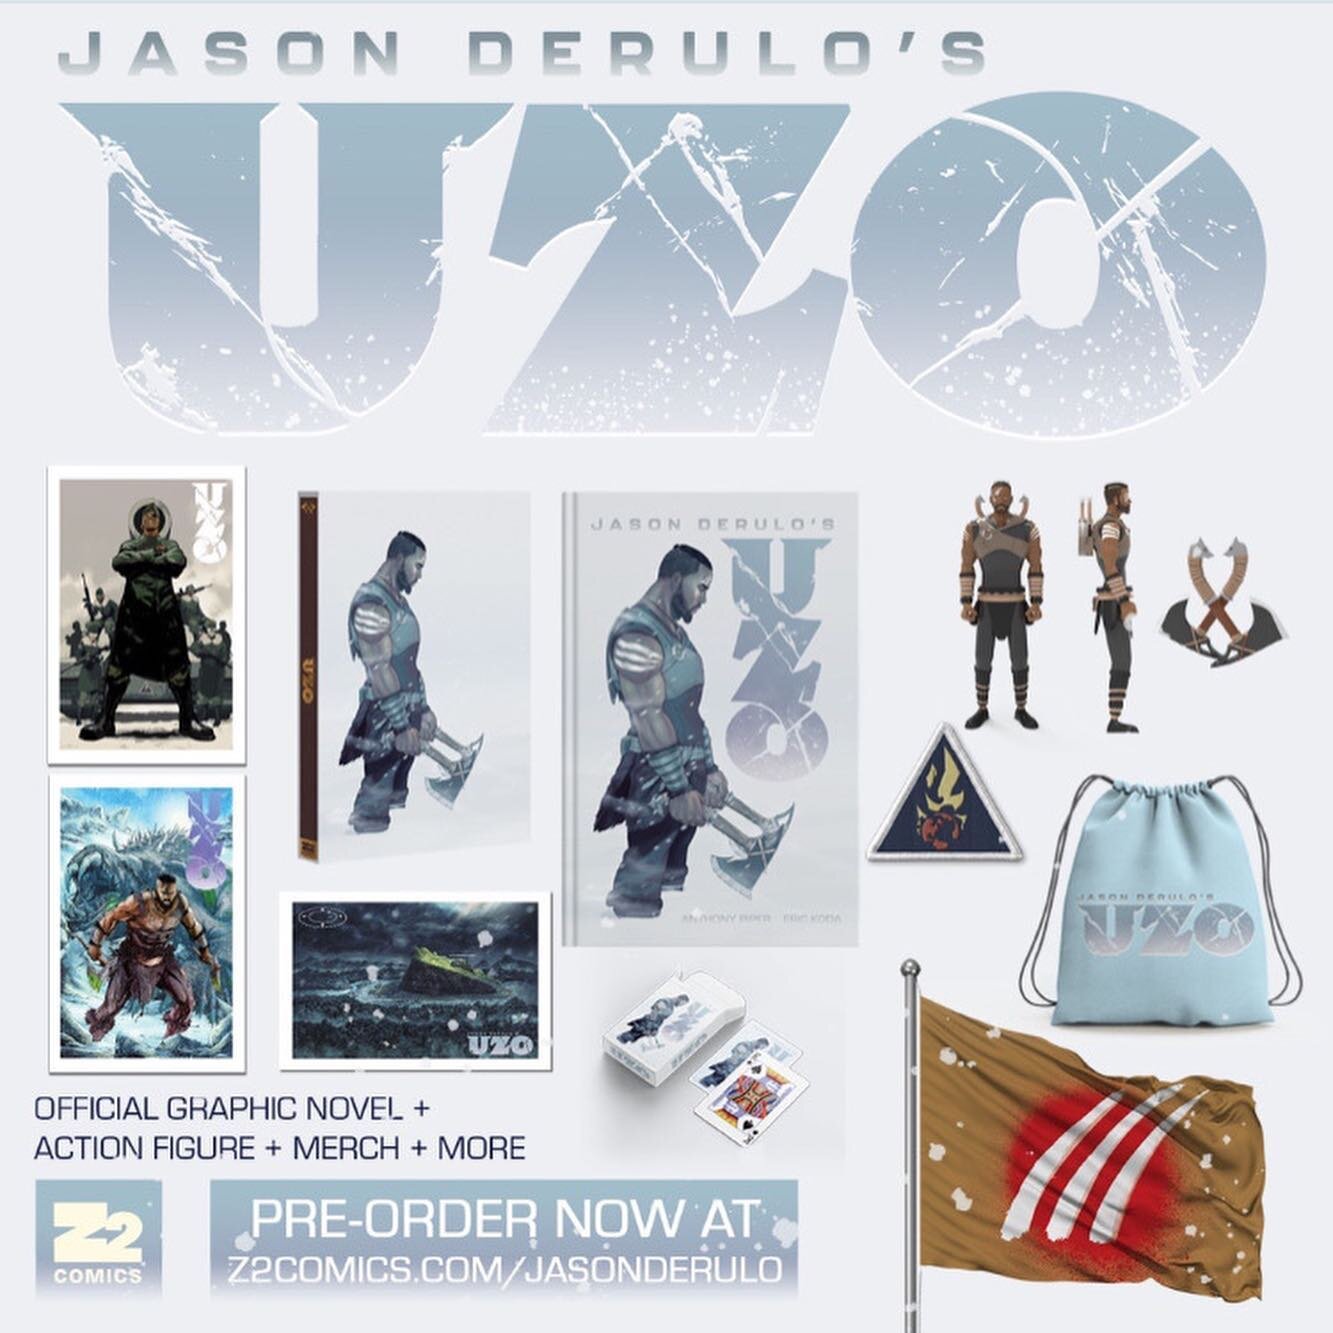 They finally announced this graphic novel that I am drawing! (In this promo the only art that&rsquo;s mine is the top left pinup). Preorder now! https://z2comics.com/products/jason-derulo-uzo-graphic-novel-action-figure-merch #z2comics #jasonderulo #